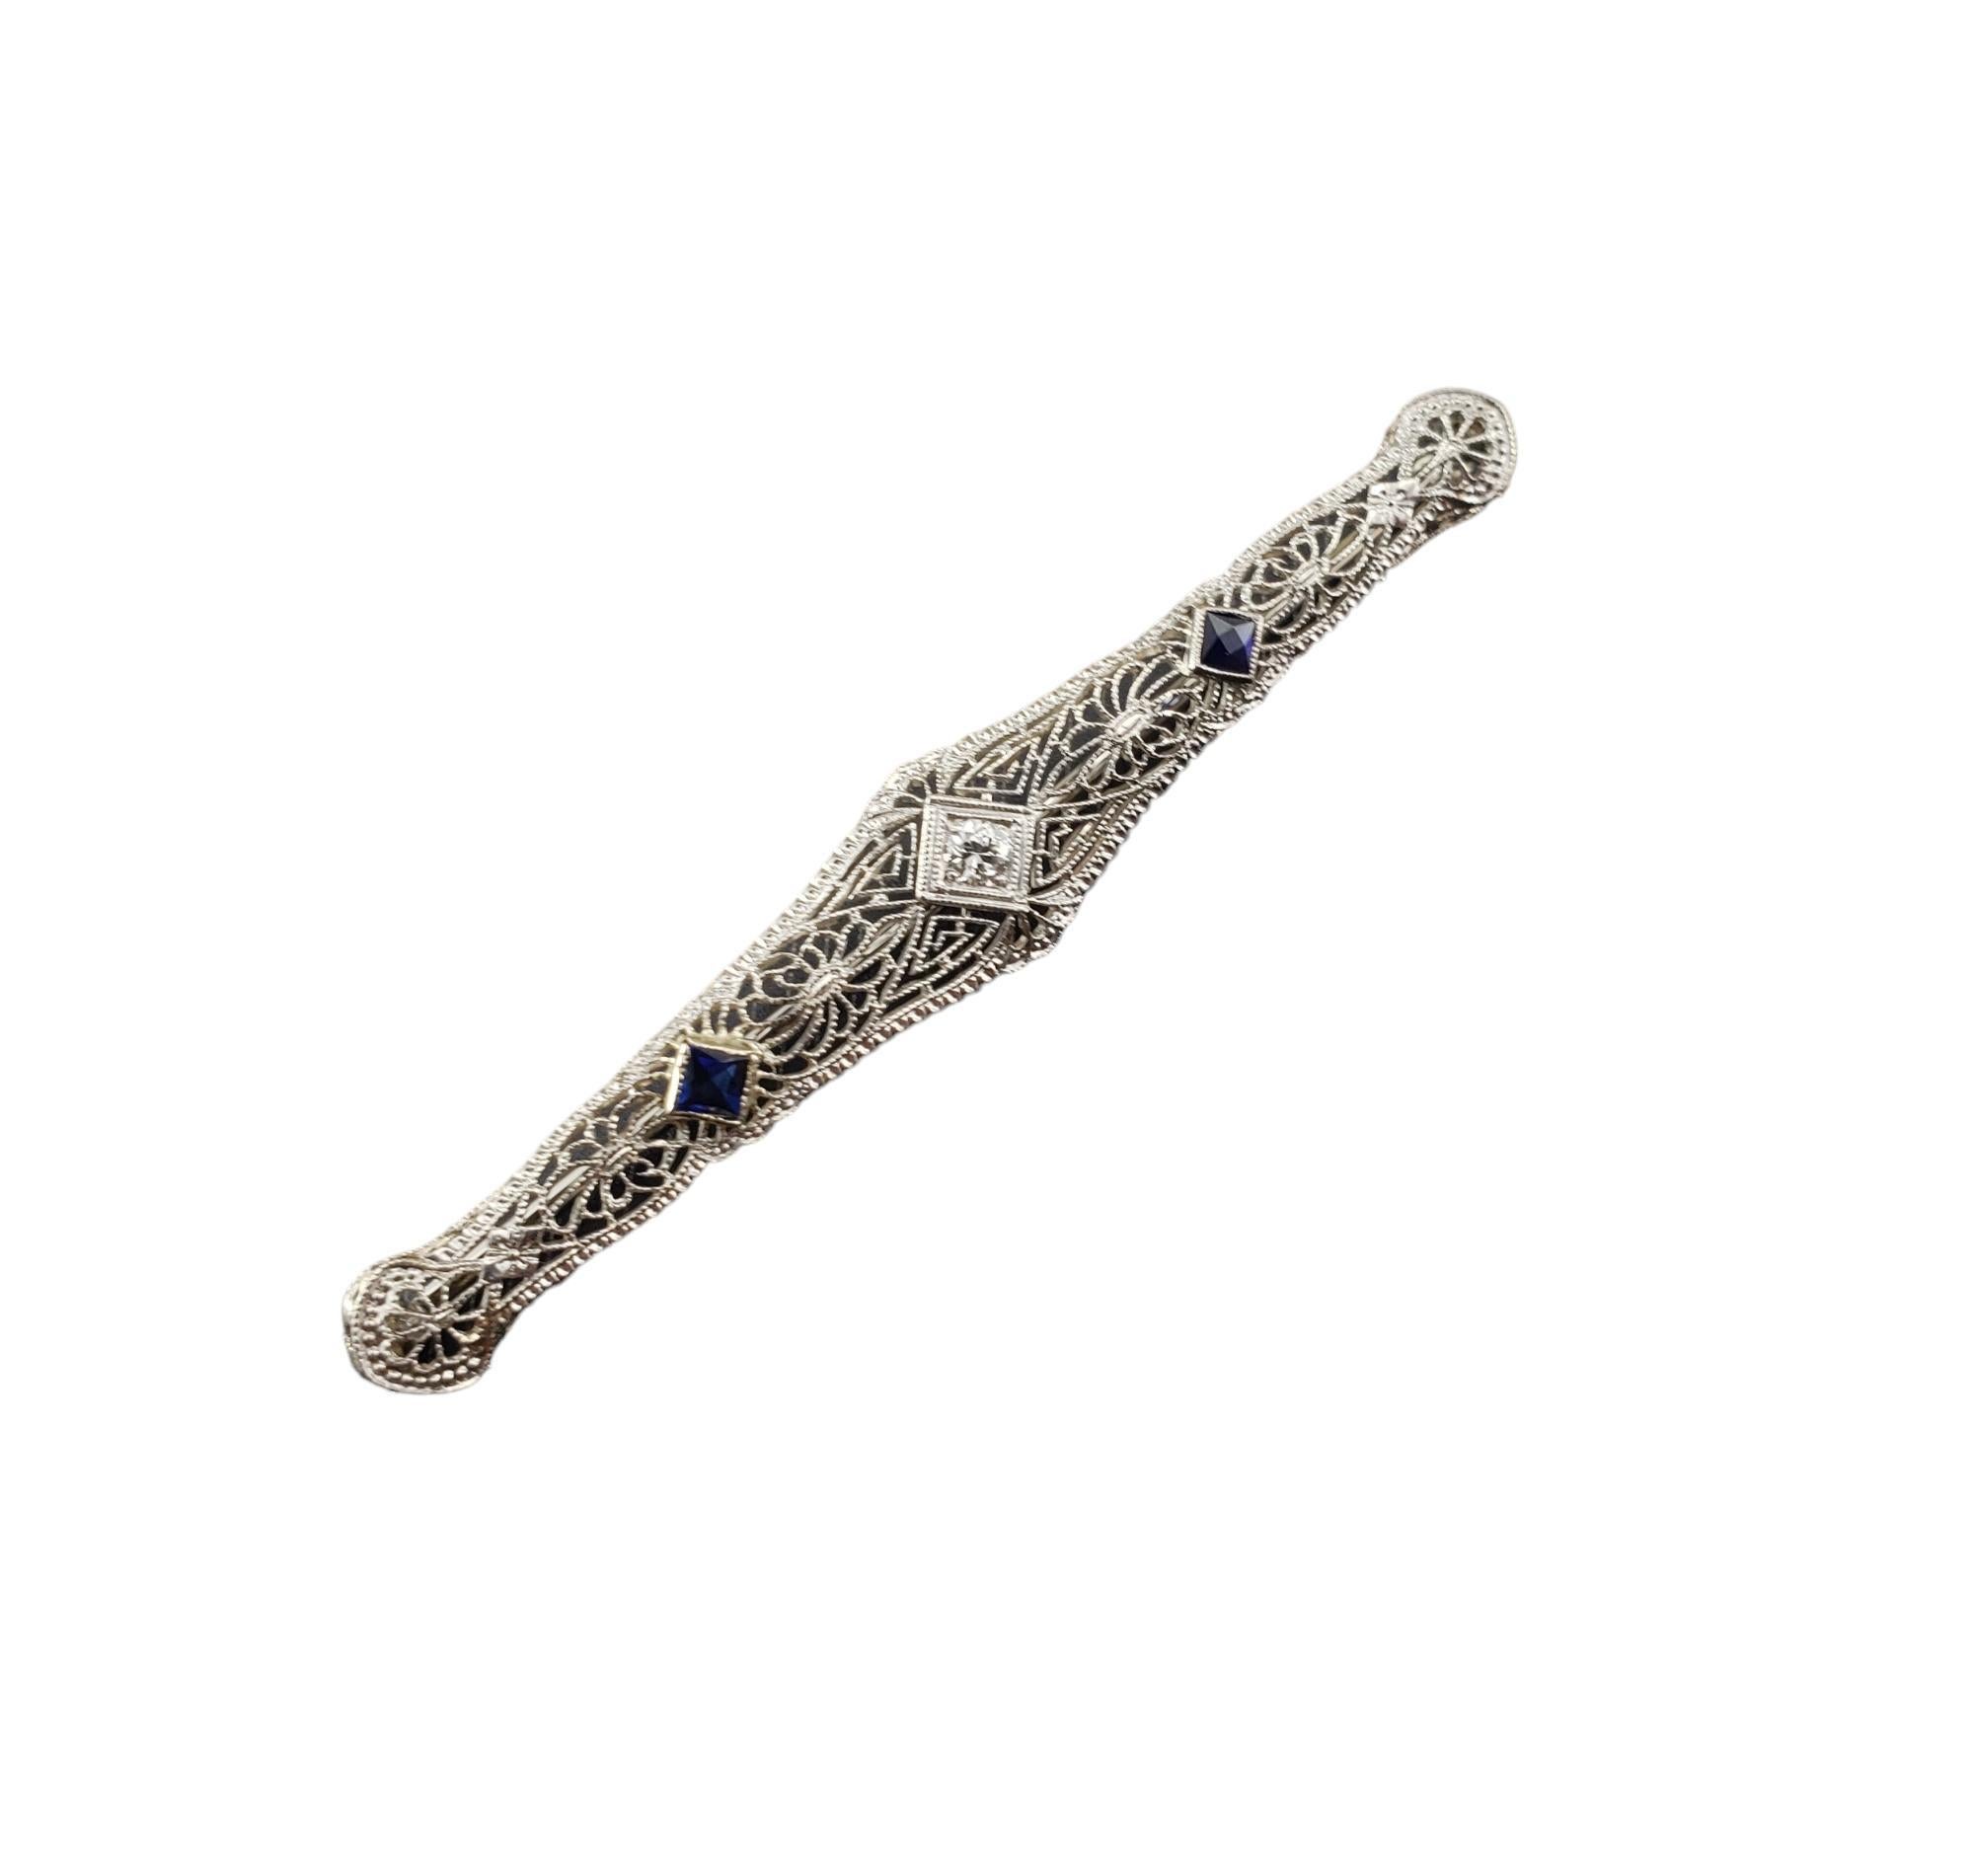 Round Cut 14K White Gold Filigree Simulated Sapphire & Diamond Brooch/Pin #17099 For Sale